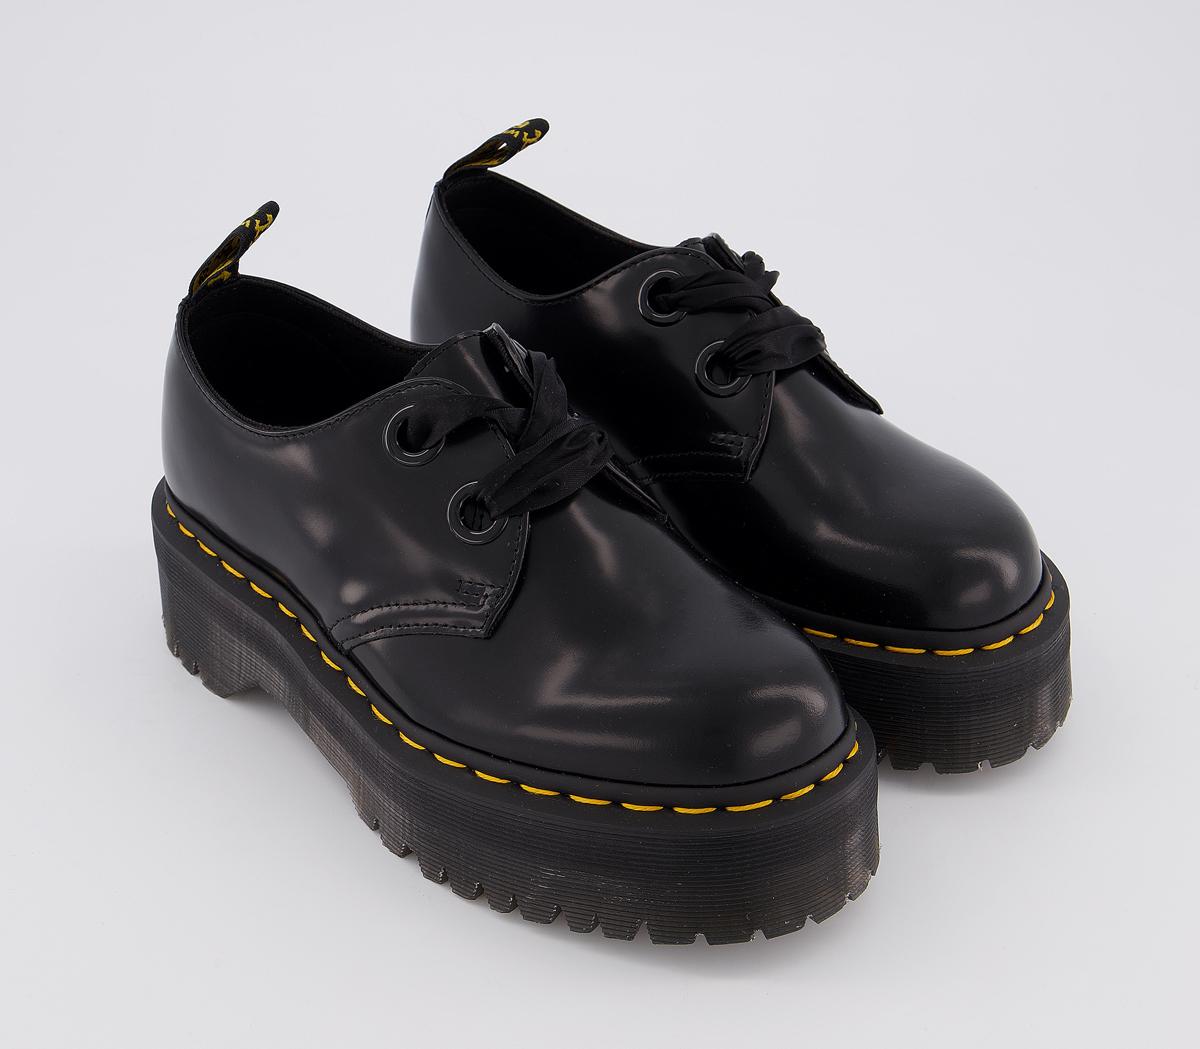 Dr. Martens Holly 2 Eye Shoes Black - Flat Shoes for Women